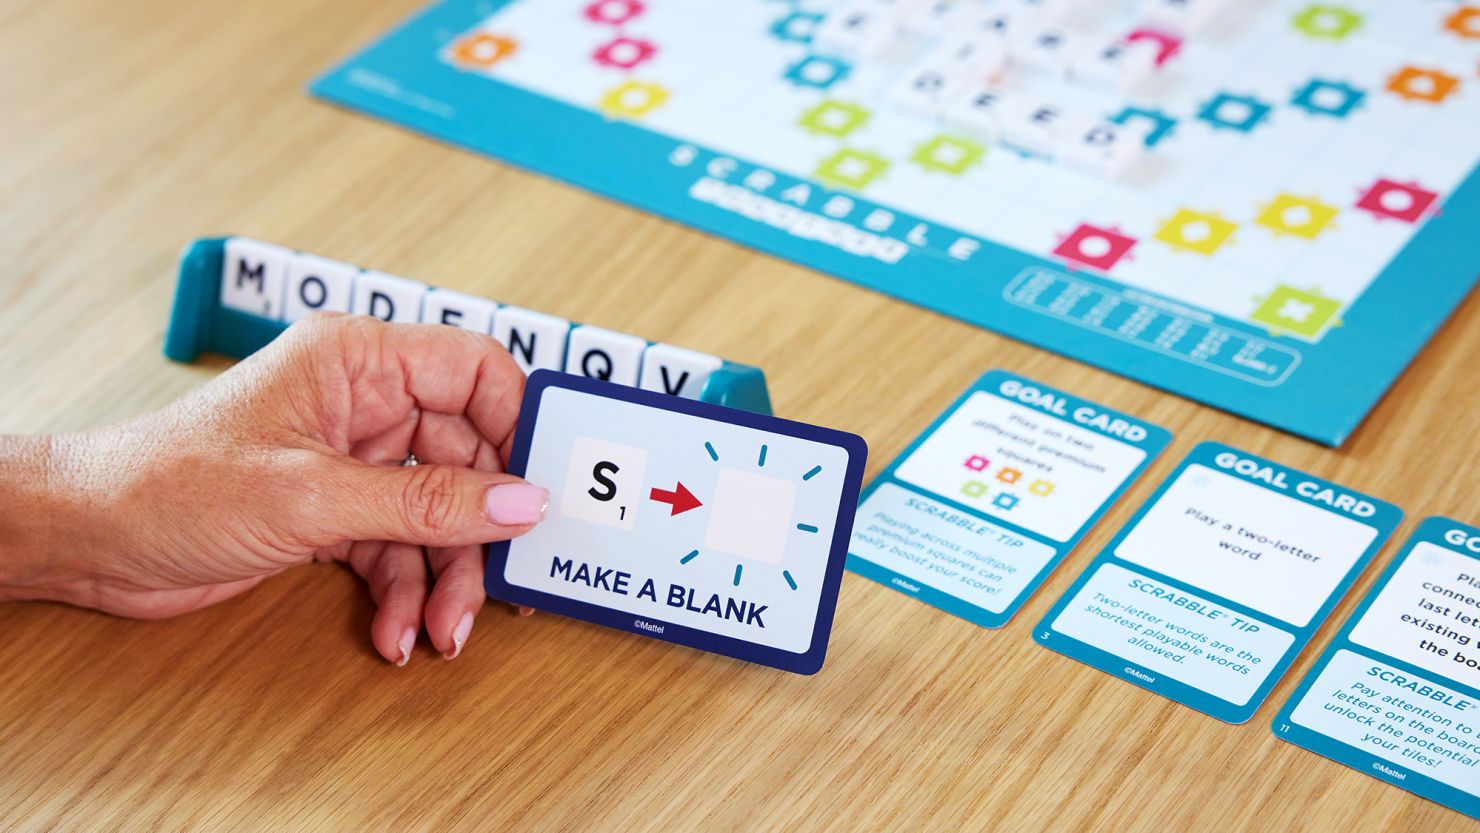 Scrabble Together aims to make the game more collaborative.